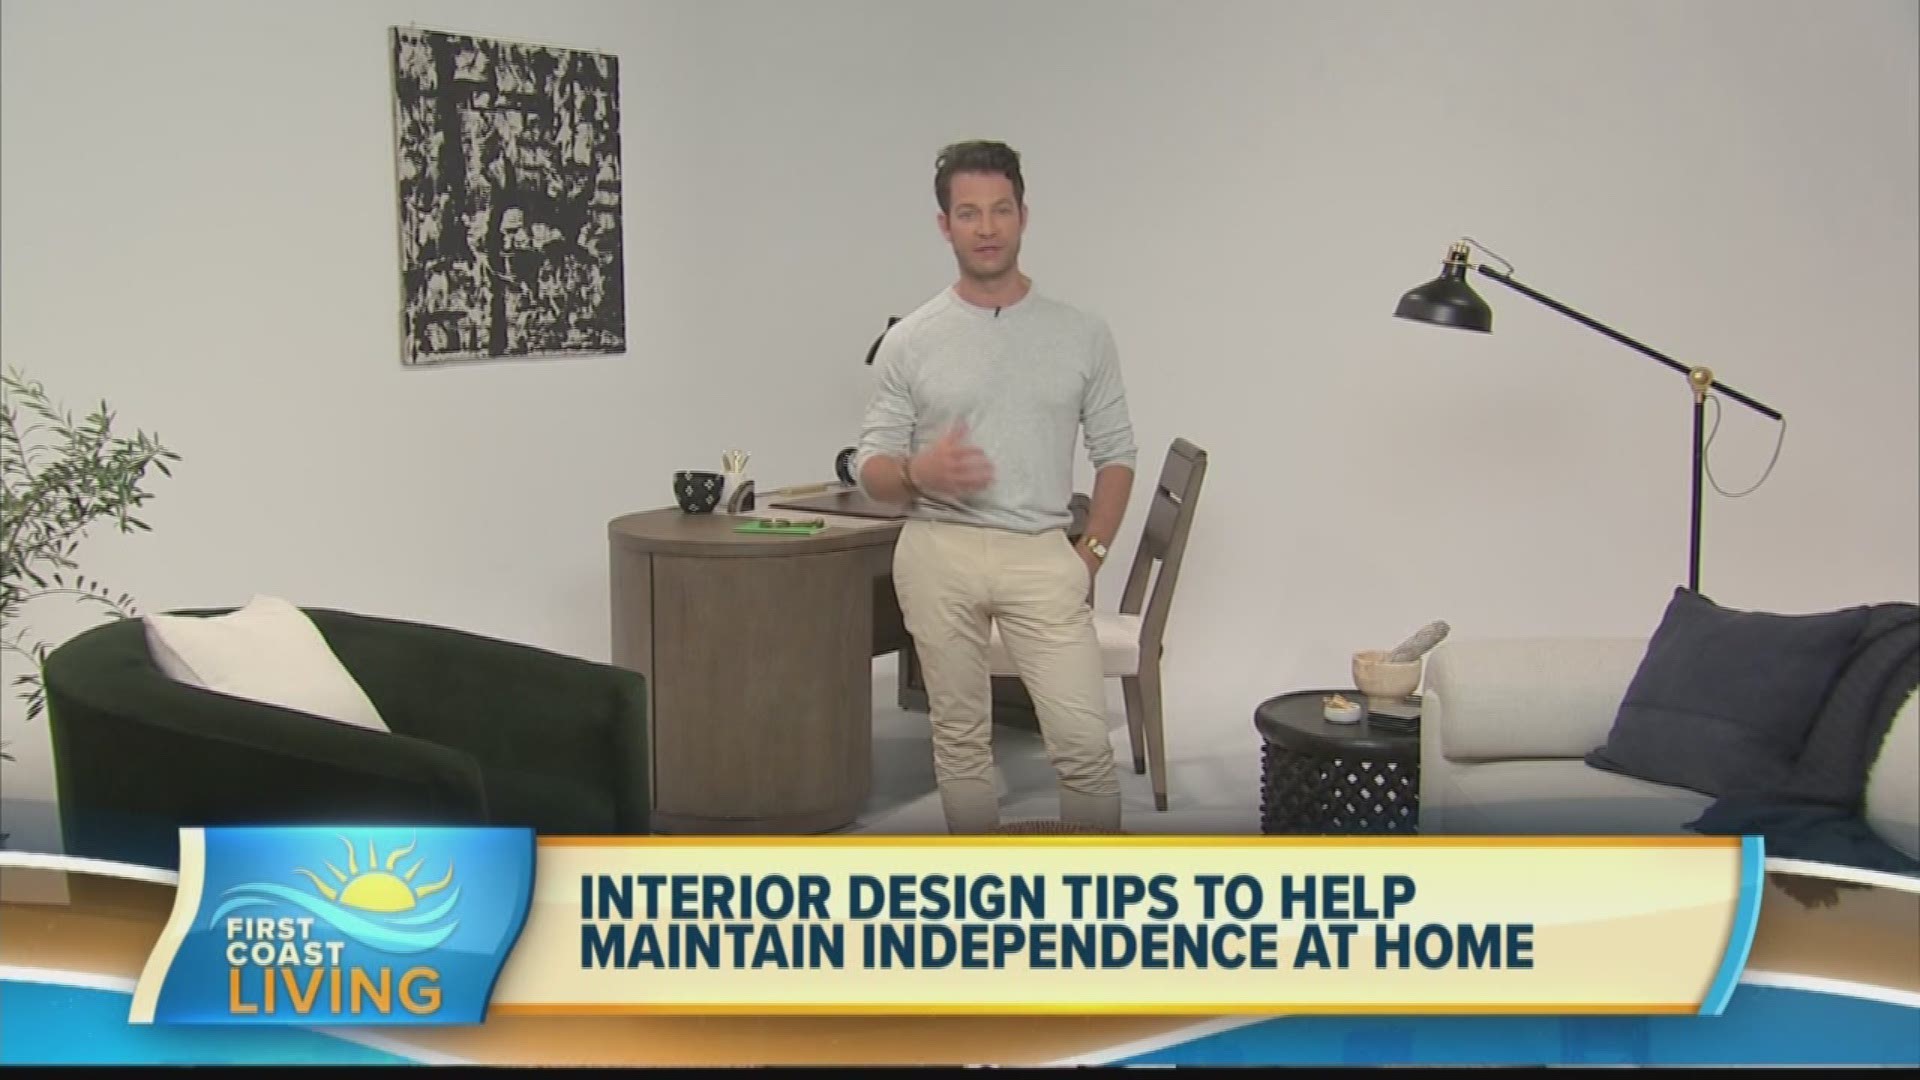 Here are some tips from a celebrity Interior Designer.